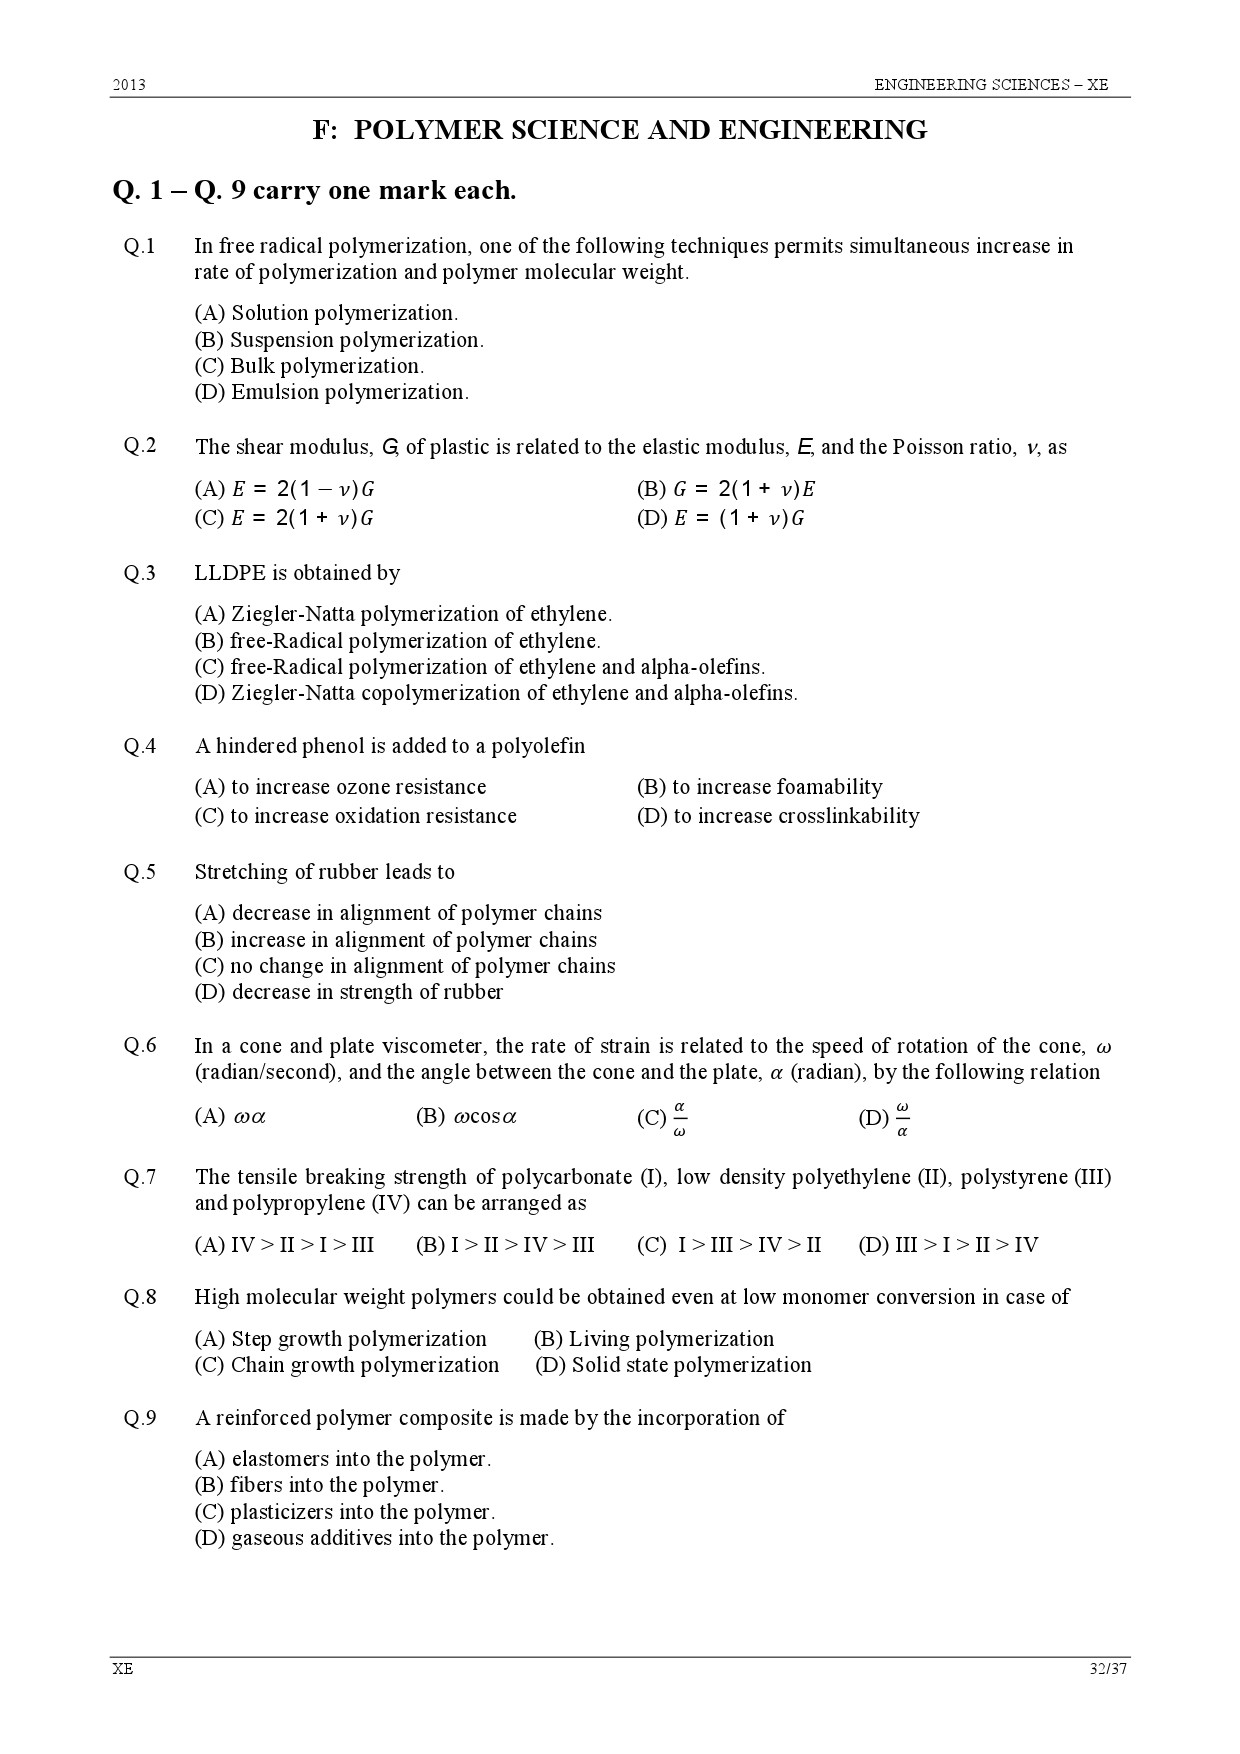 GATE Exam Question Paper 2013 Engineering Sciences 32